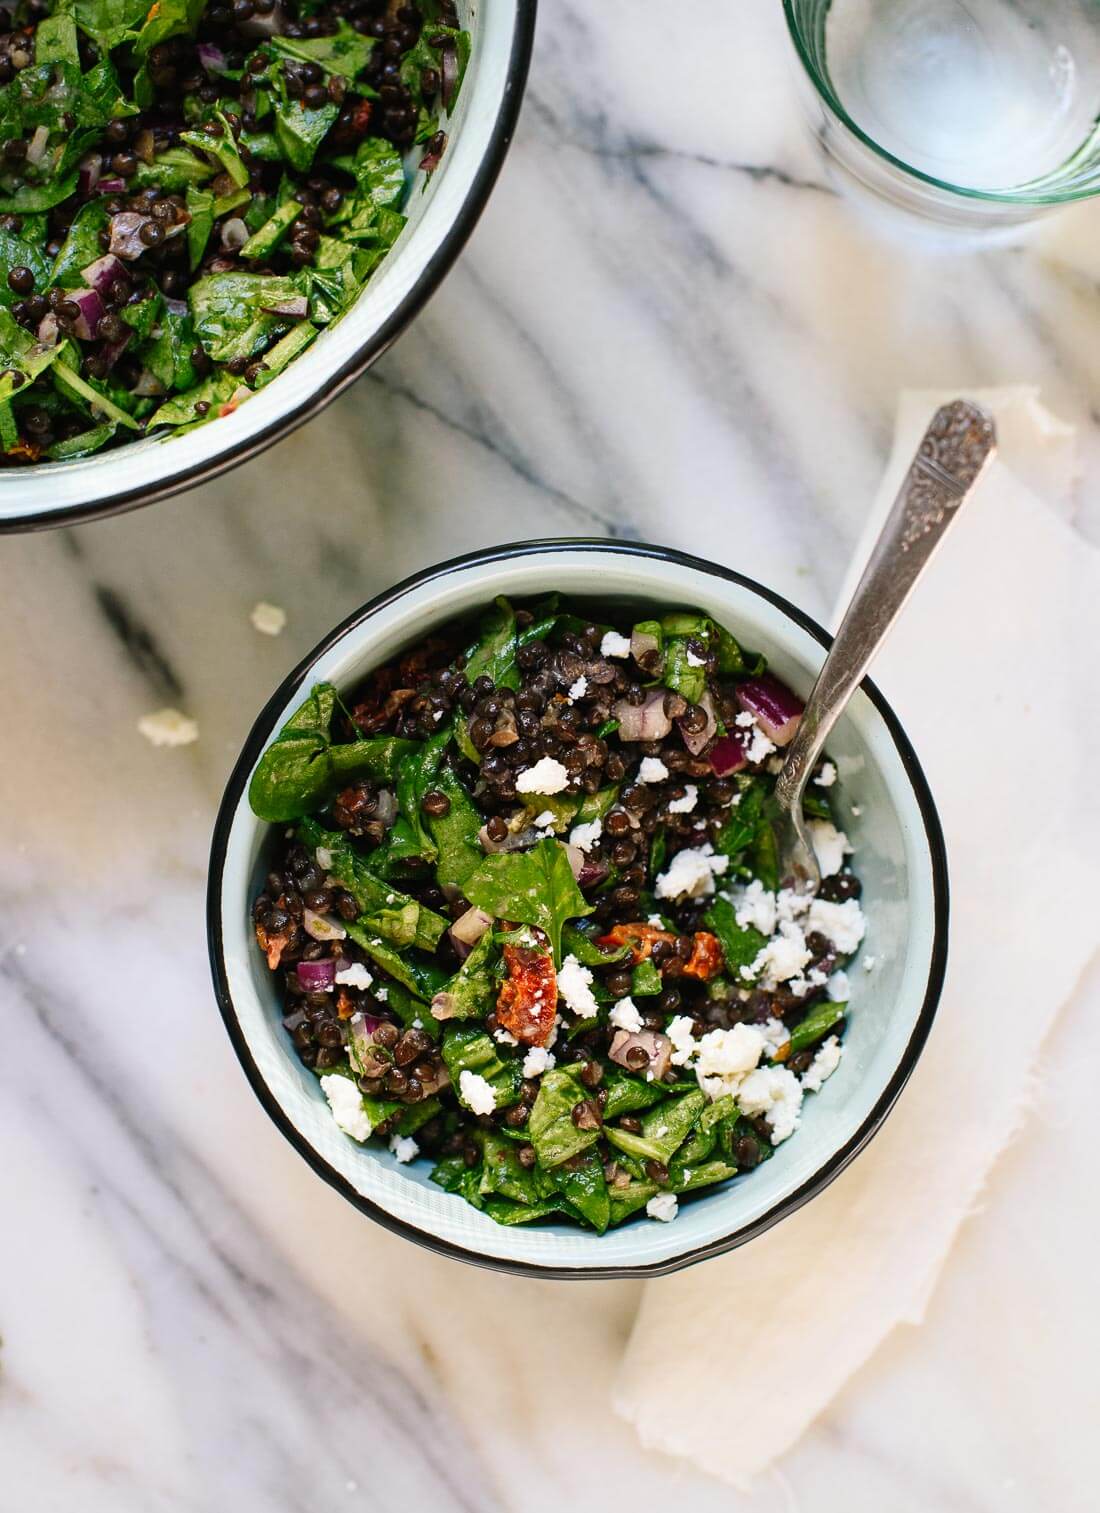 This Greek lentil salad recipe is fresh, delicious and simple to make! cookieandkate.com